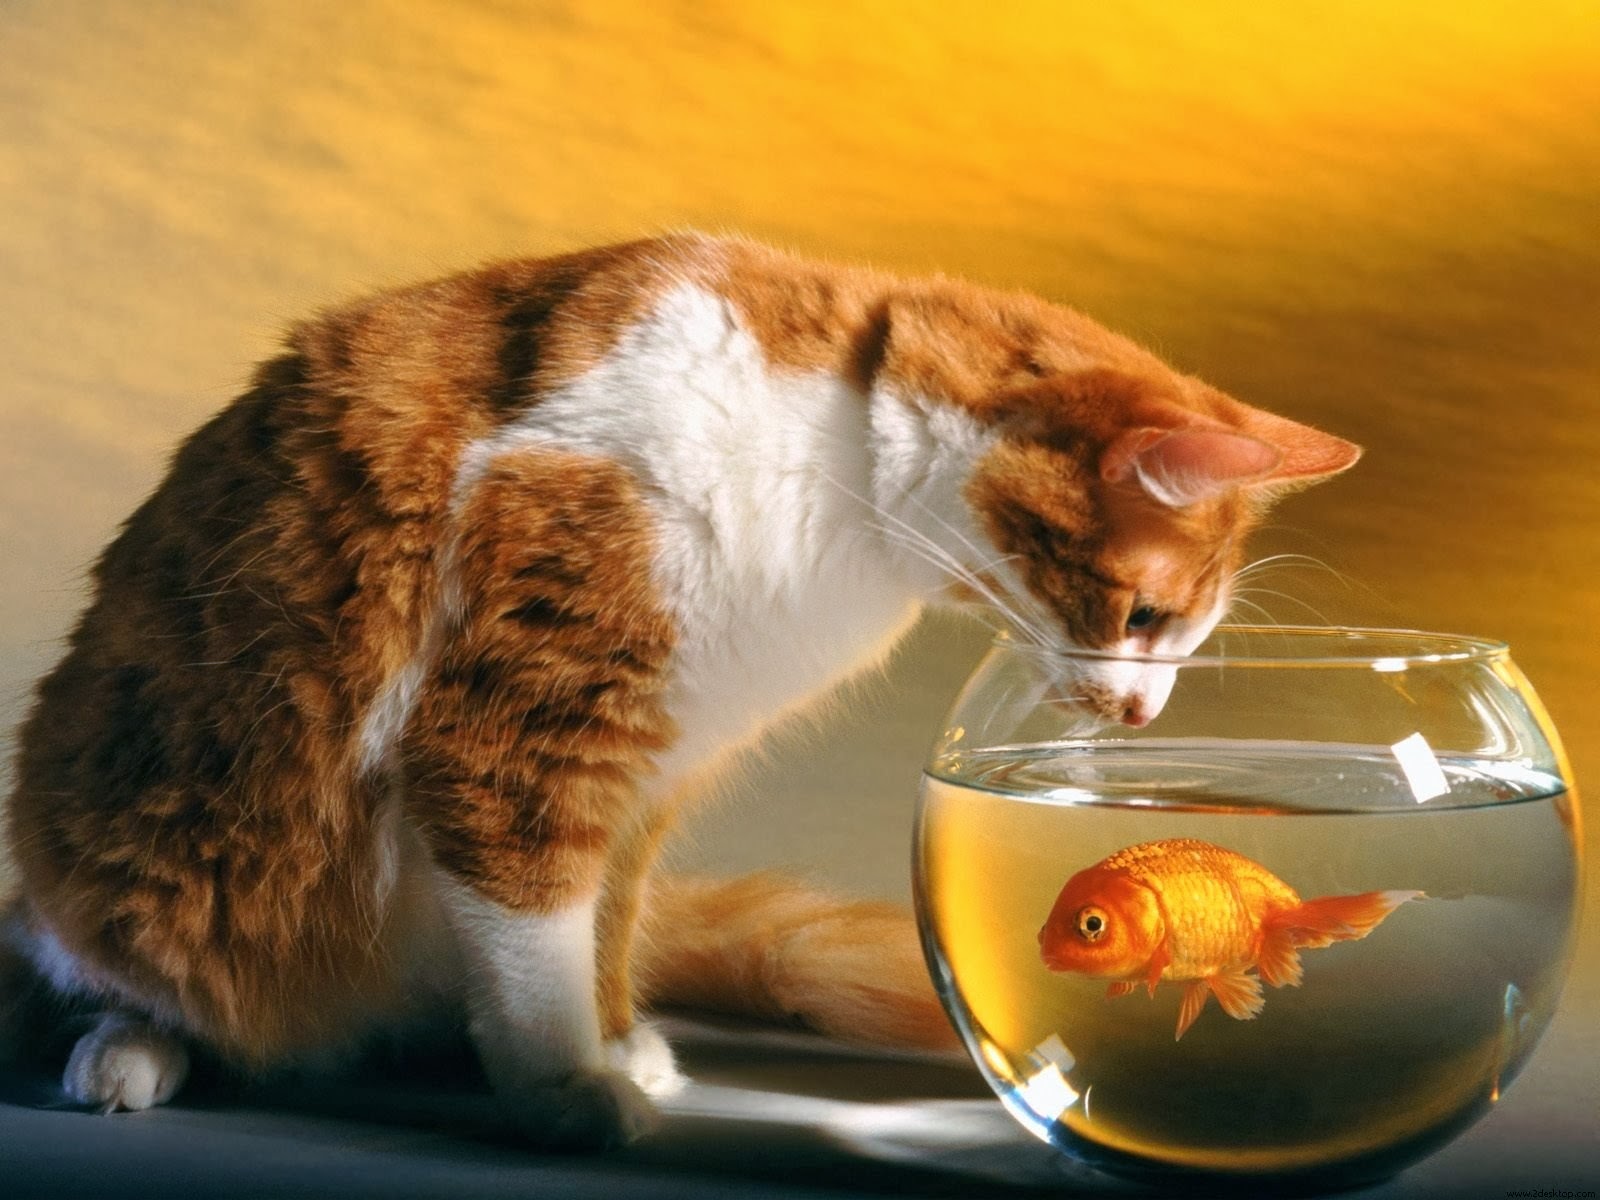 Kittens+look+at+the+golden+fish+wallpape